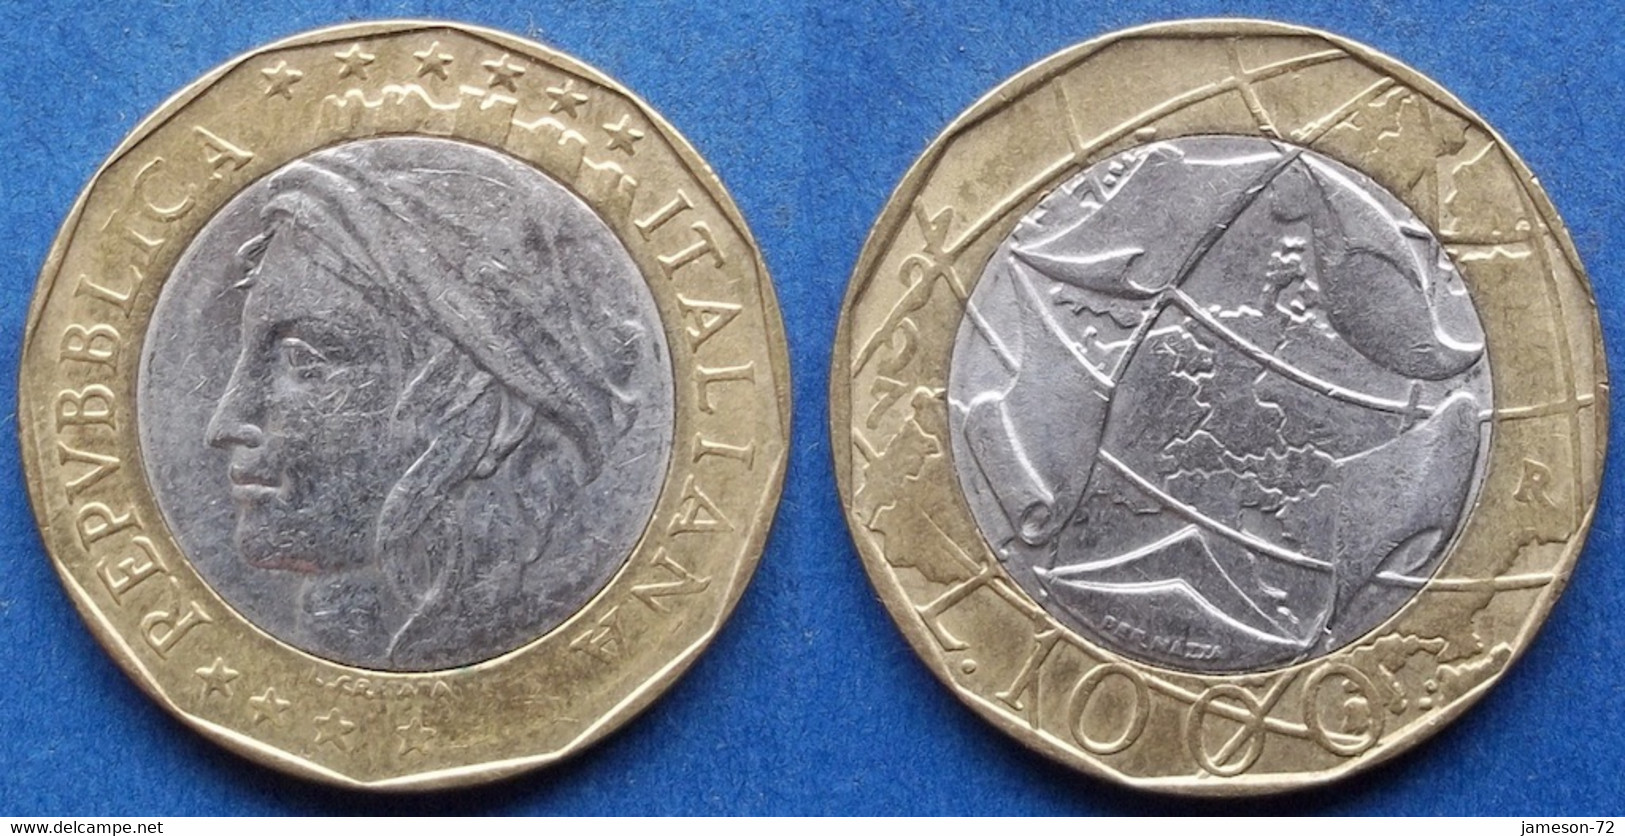 ITALY - 1000 Lire 1997 R "Mistake On German Map" KM# 190 Republic Lira Coinage (1946-2002) - Edelweiss Coins - 1 000 Lire